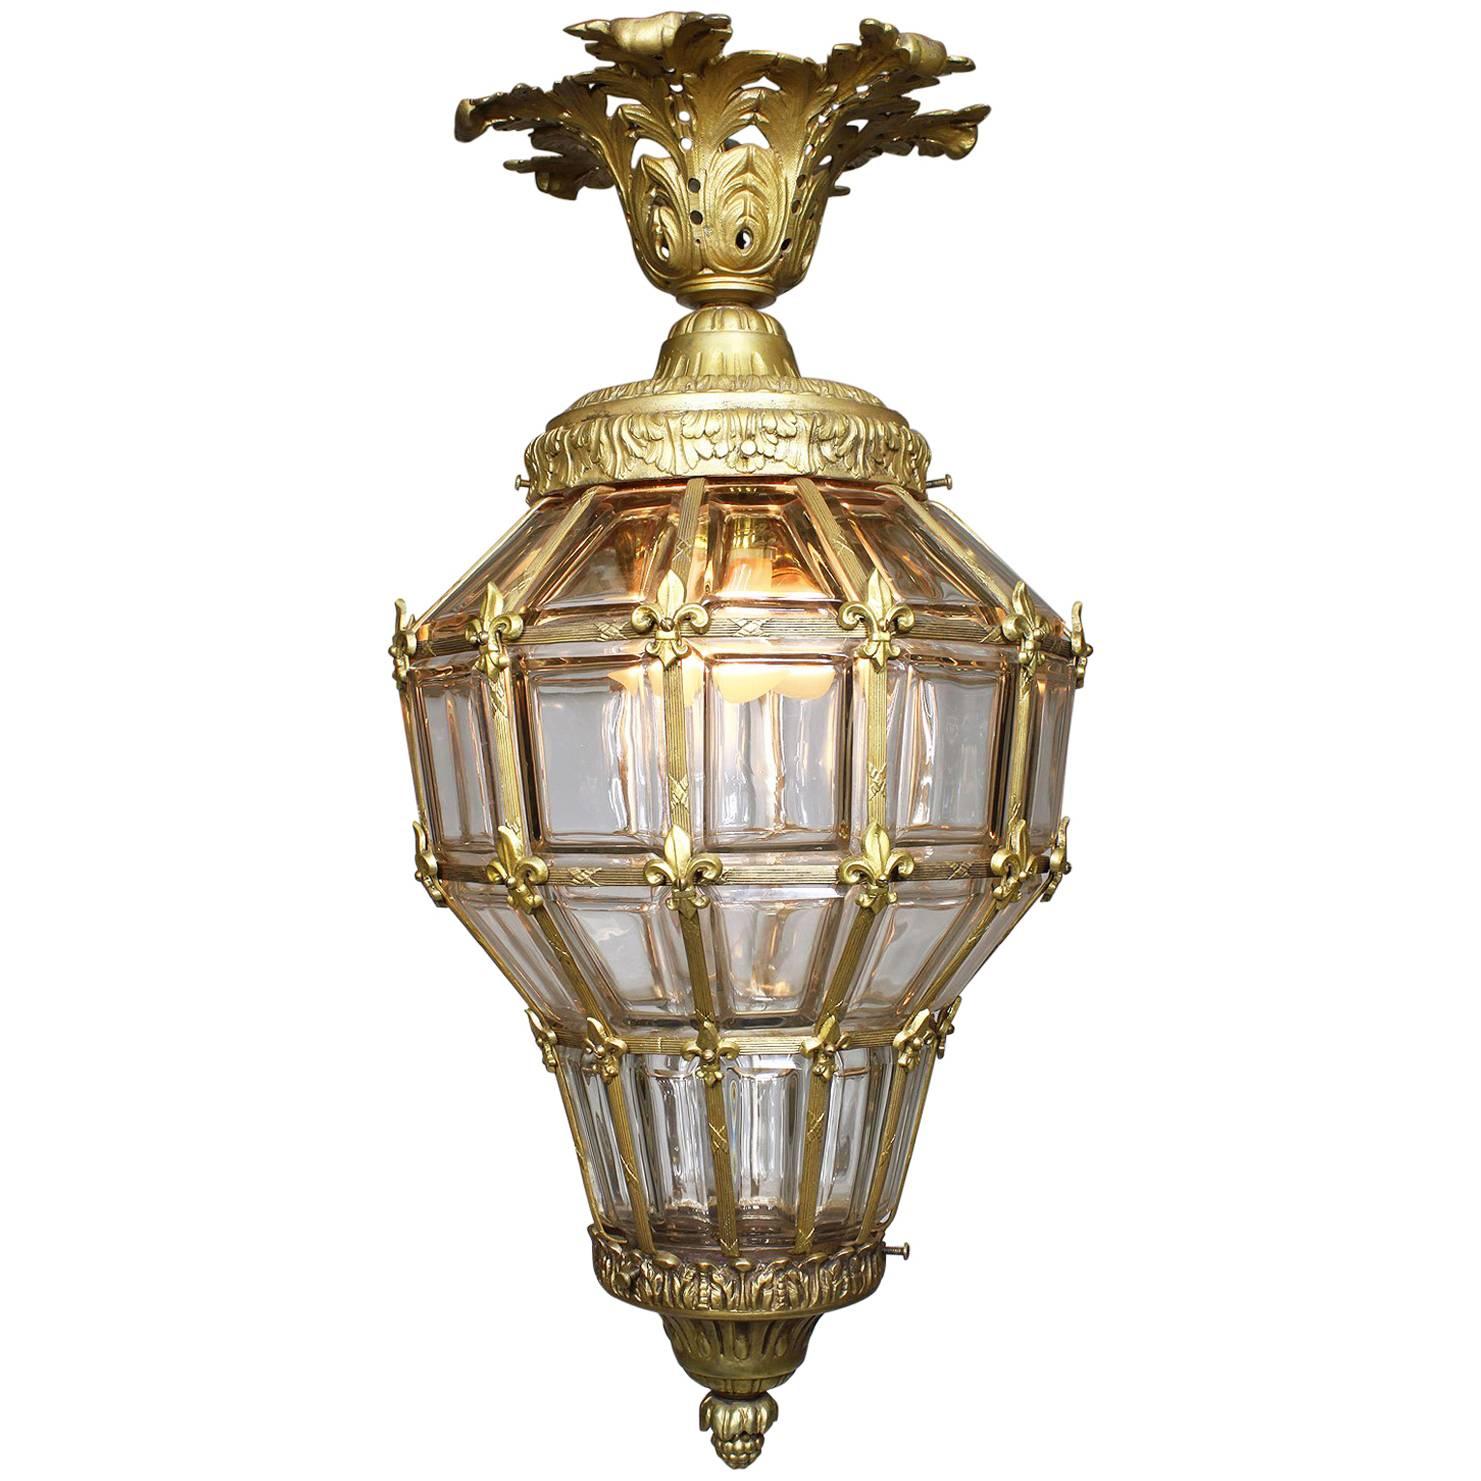 French Early 20th Century Louis XIV Style Gilt Bronze "Versailles" Style Lantern For Sale